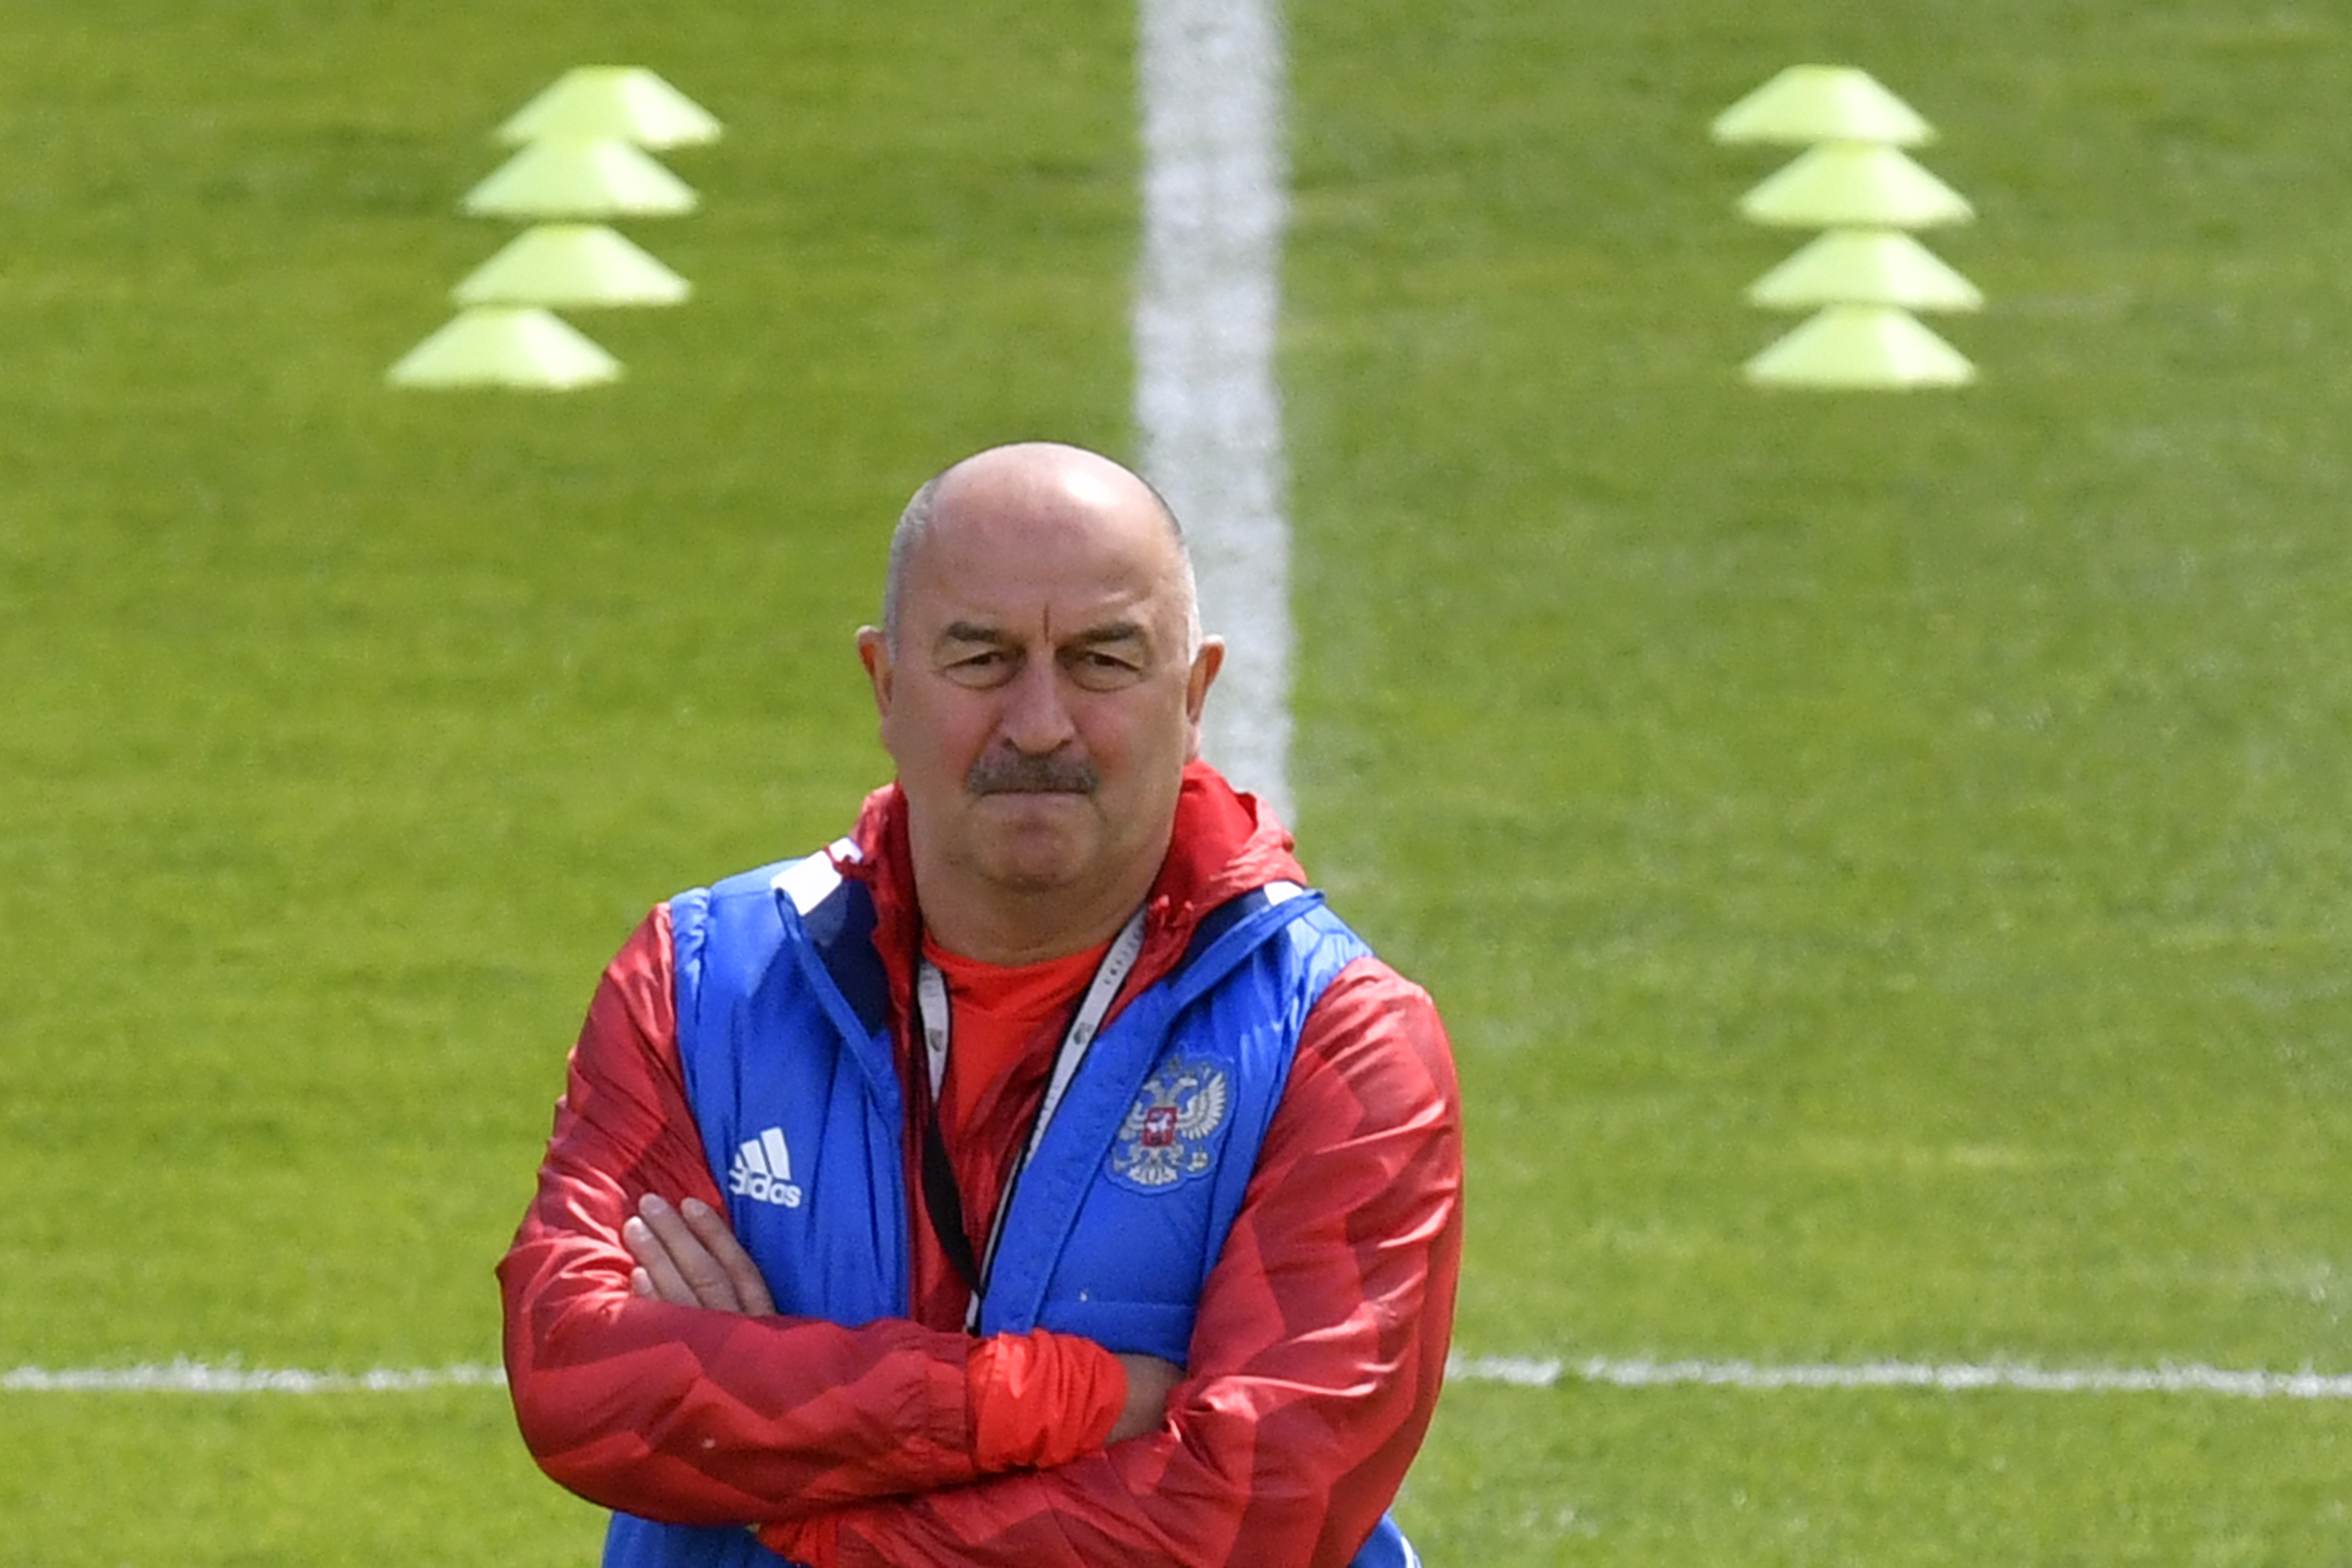 Russia's national football team head coach Stanislav Cherchesov leads a training session on June 7, 2017 at Moscow's Eduard Streltsov Stadium, as part of the team's preparation for the upcoming 2017 FIFA Confederations Cup. / AFP PHOTO / Yuri KADOBNOV        (Photo credit should read YURI KADOBNOV/AFP/Getty Images)